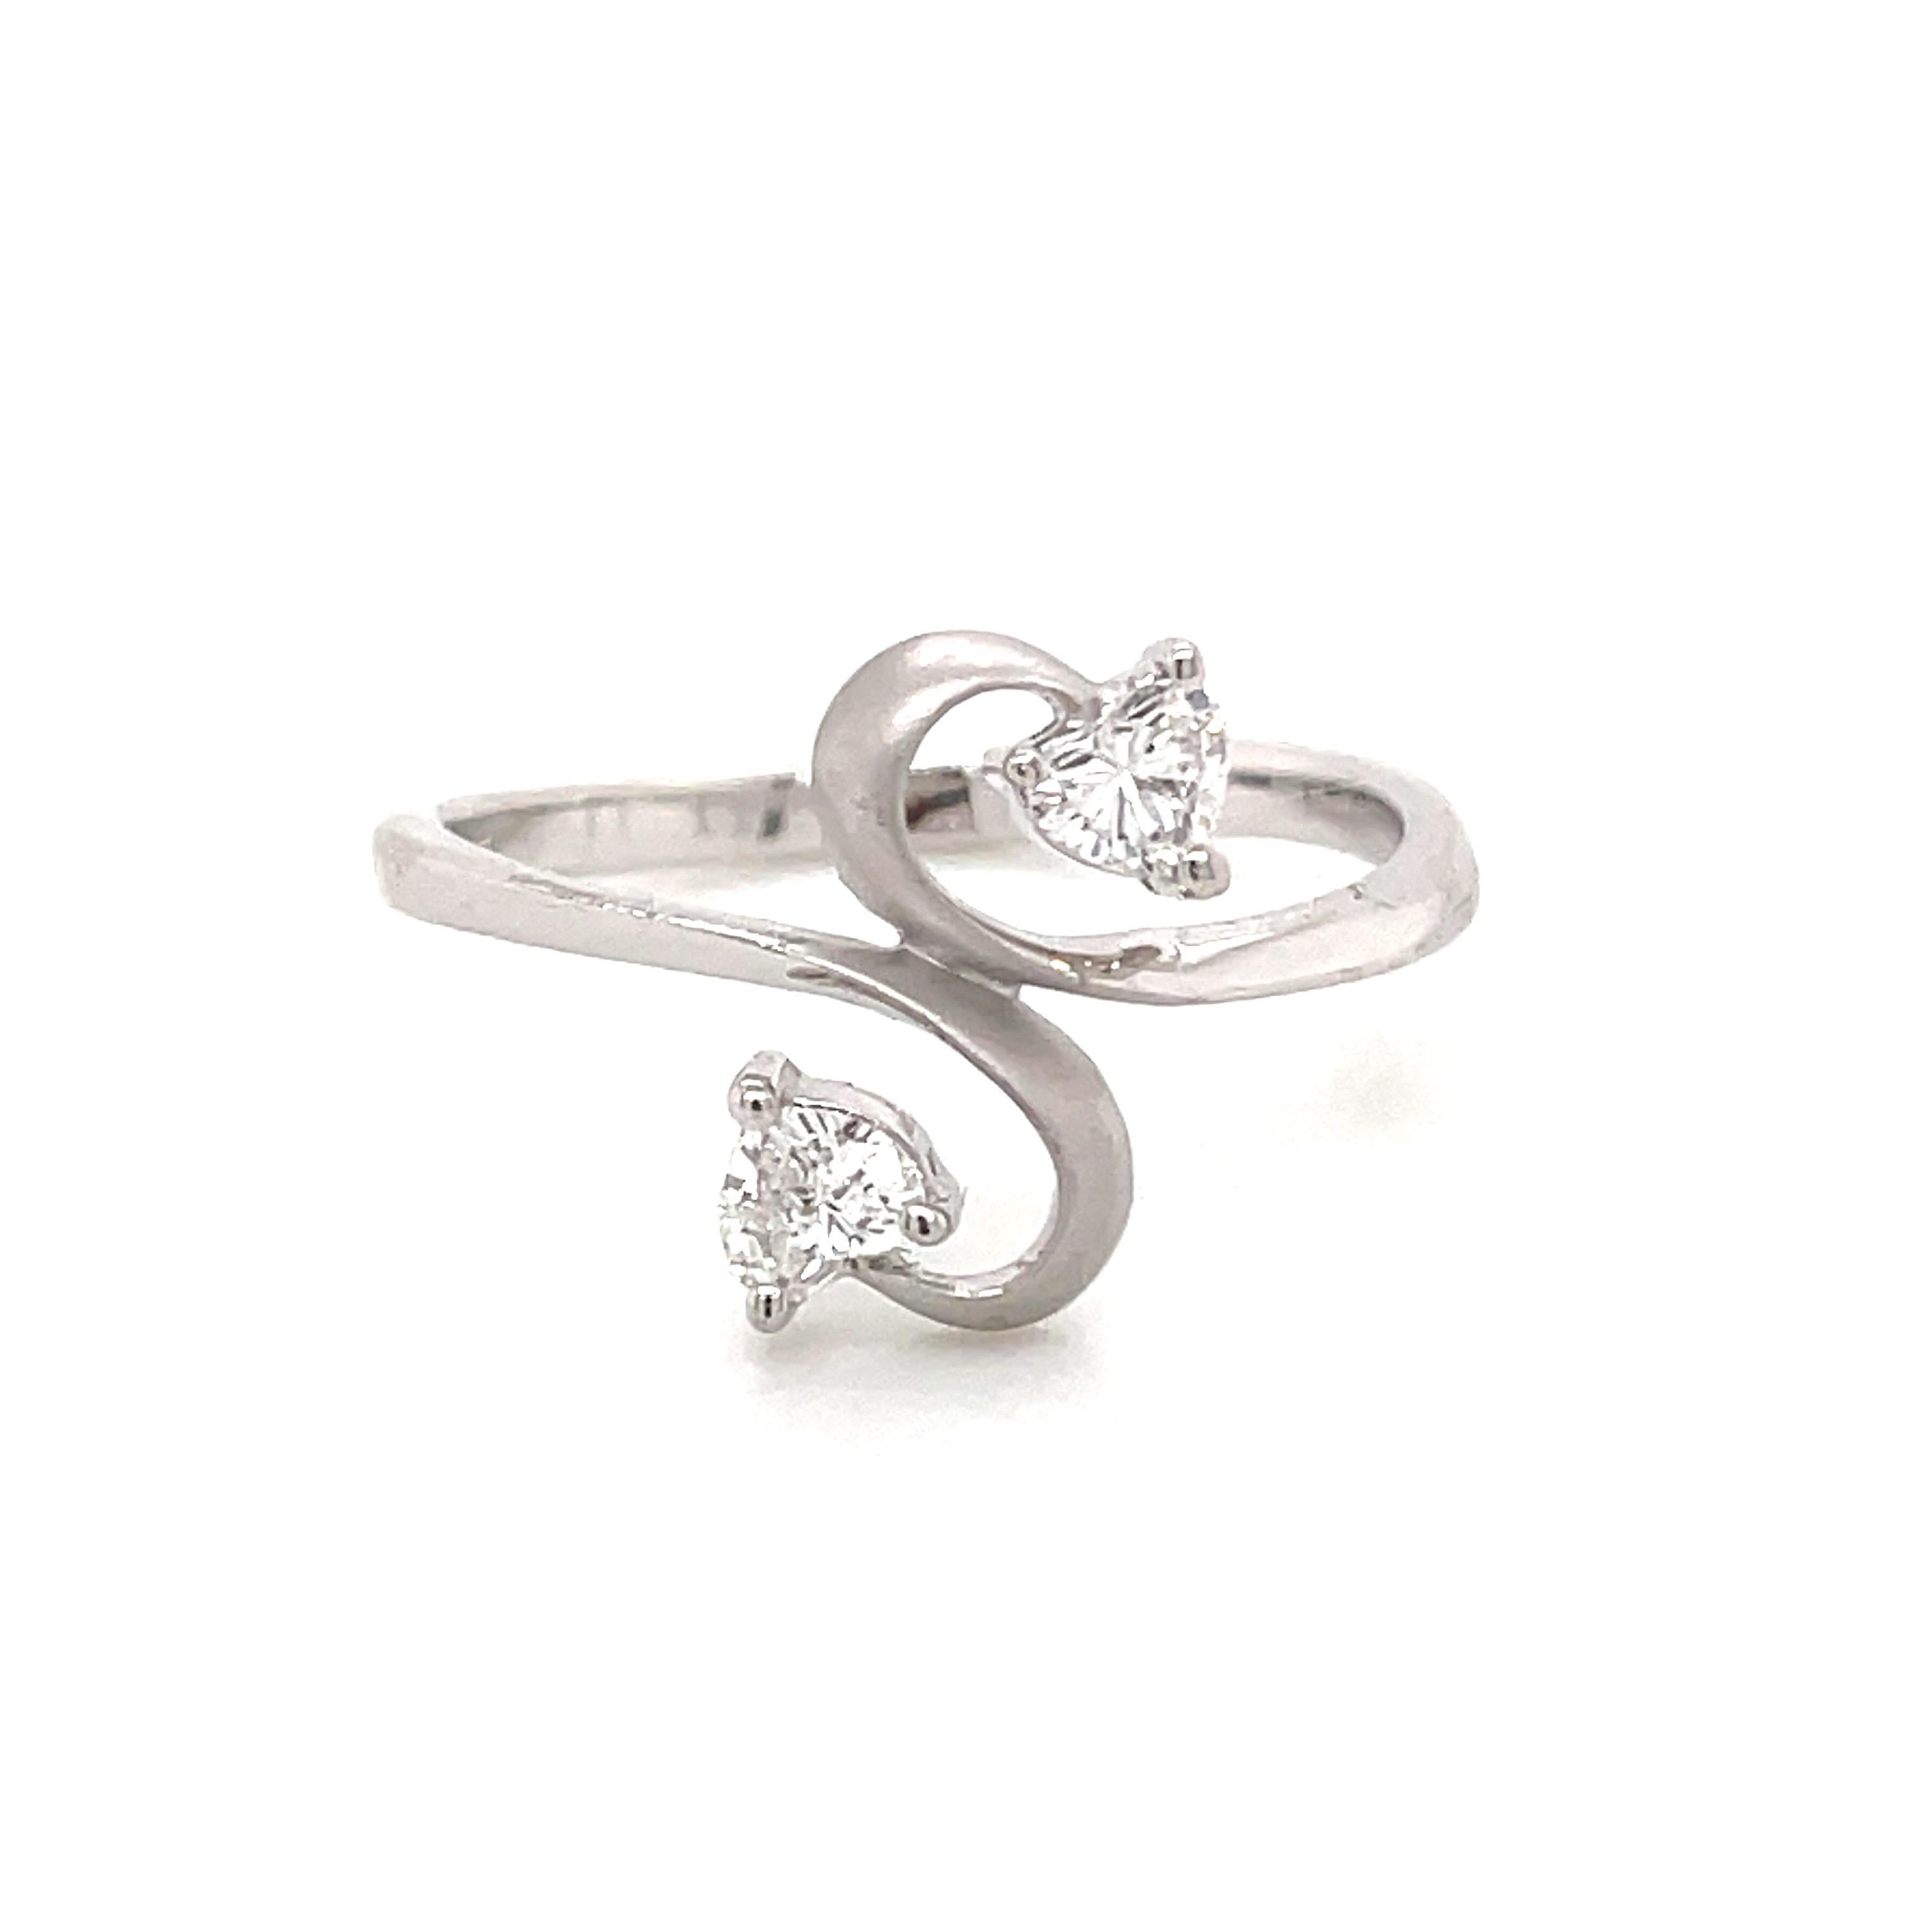 Celebrate love with this Heart-Shaped Diamond and Platinum Engagement Ring! 

Featuring two charming heart-shaped white diamonds, totaling 0.24 carats, this ring is a symbol of affection and commitment. 

Notably, these two heart-shaped diamonds